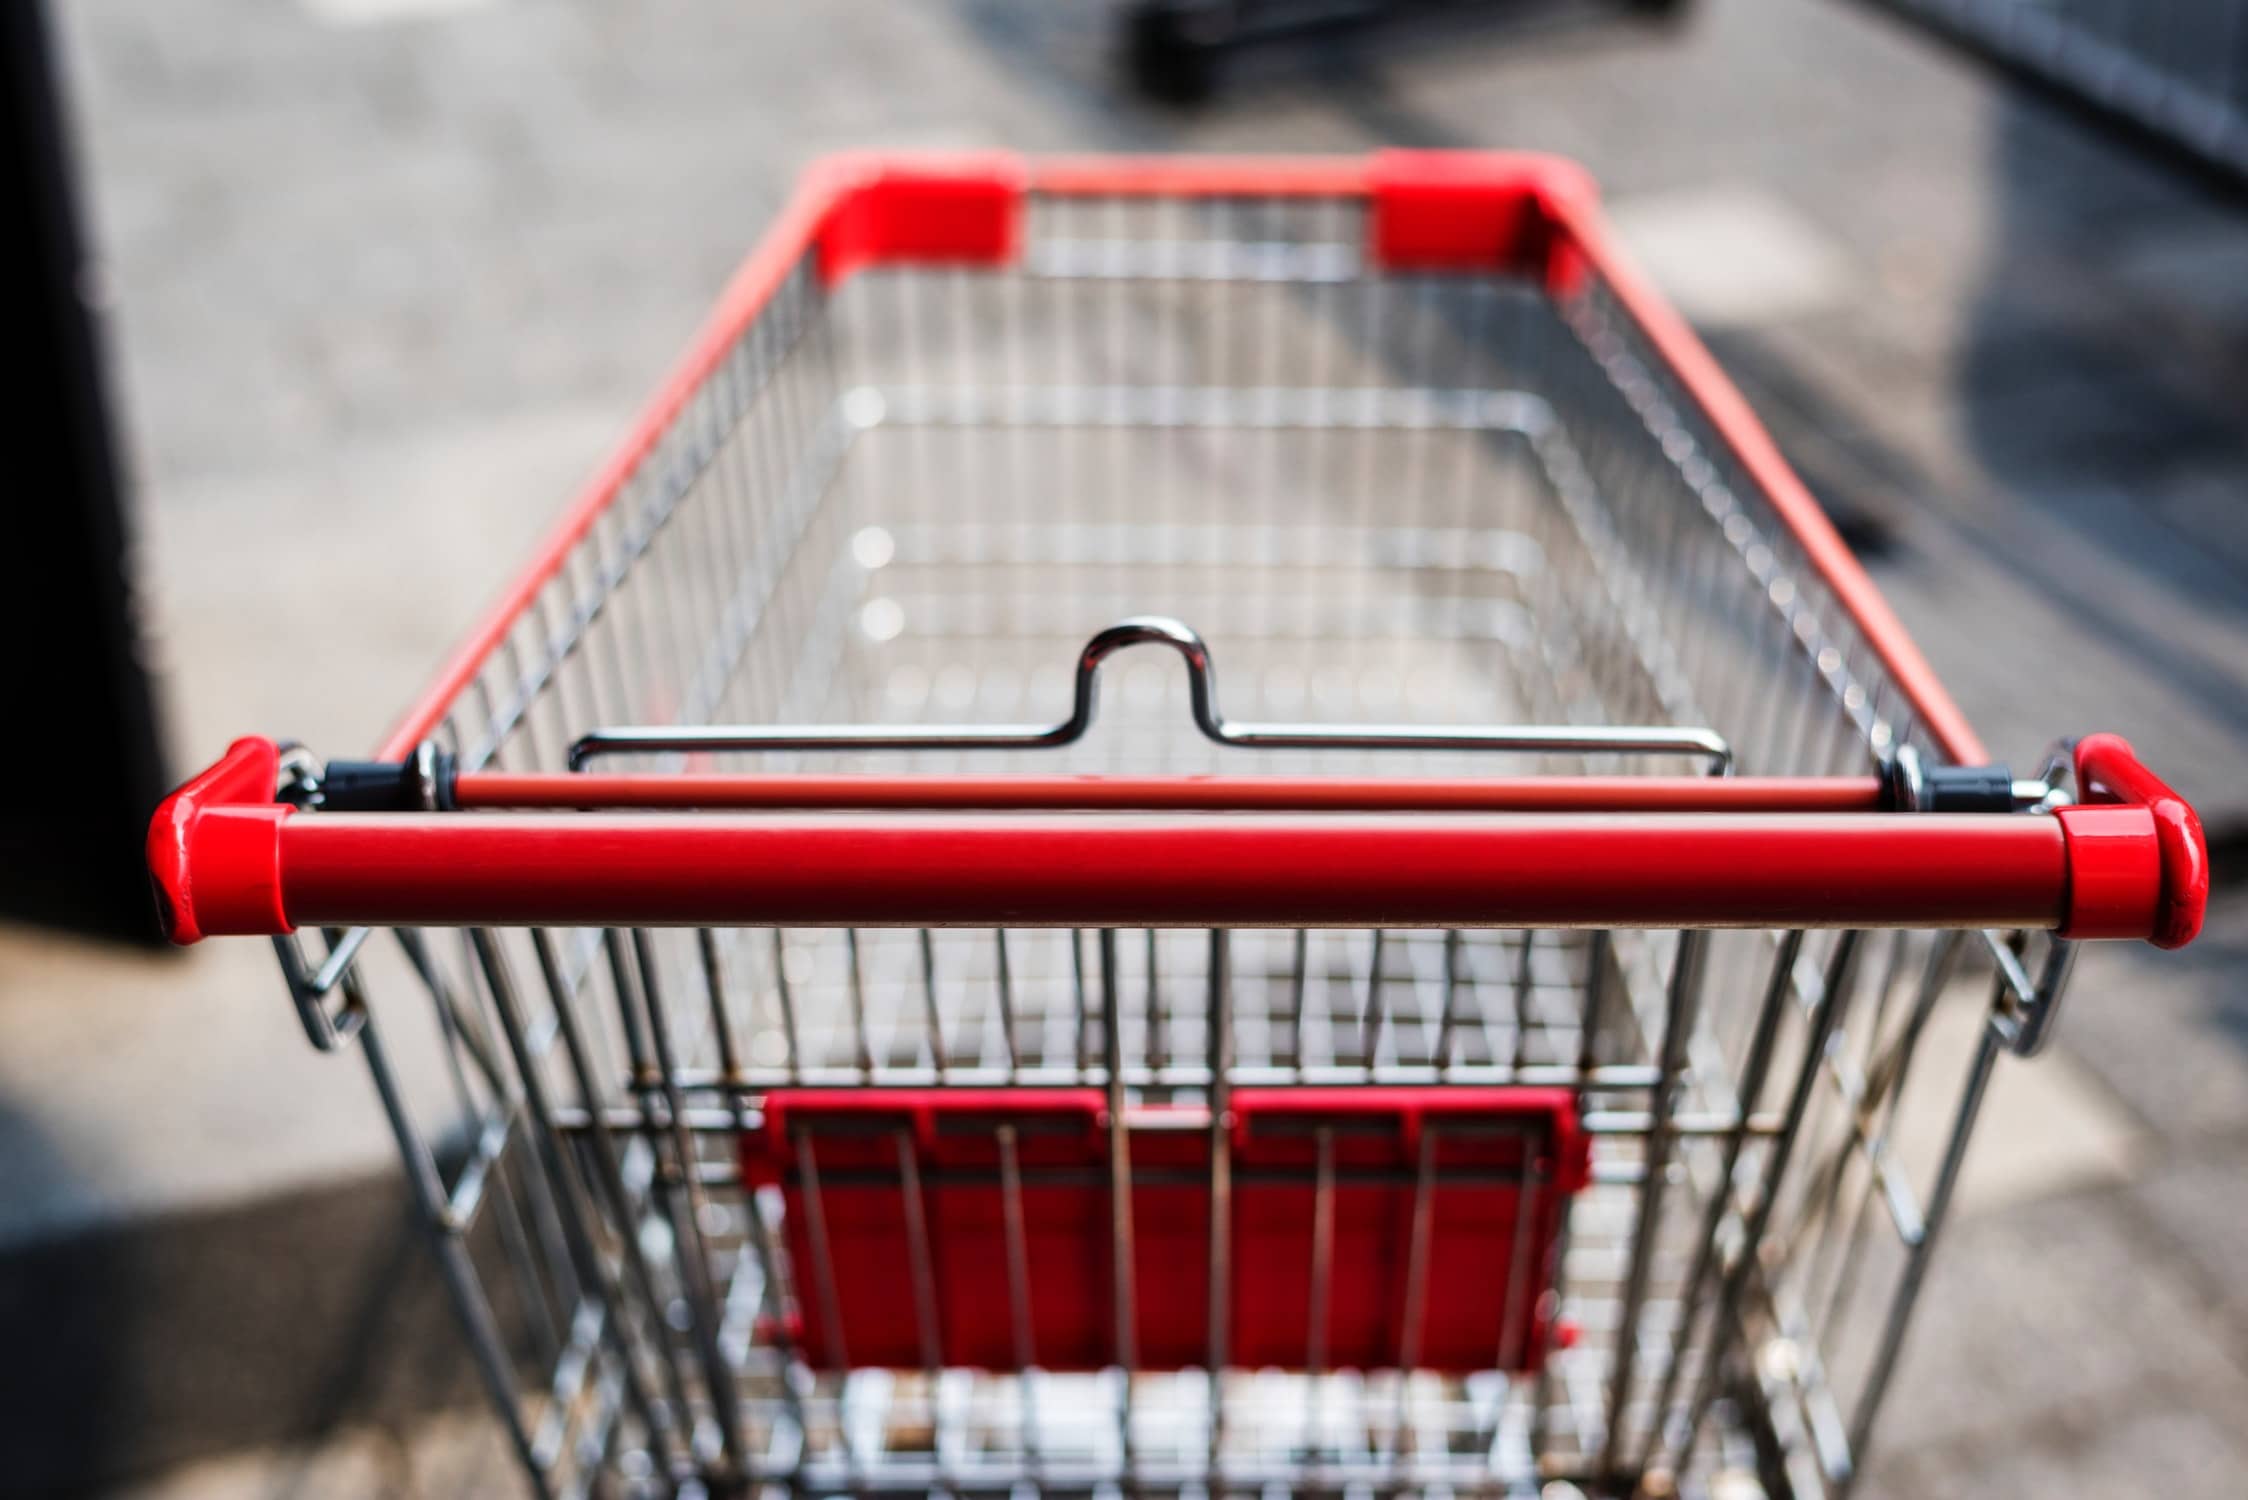 Do your e-commerce shoppers keep abandoning their online baskets?